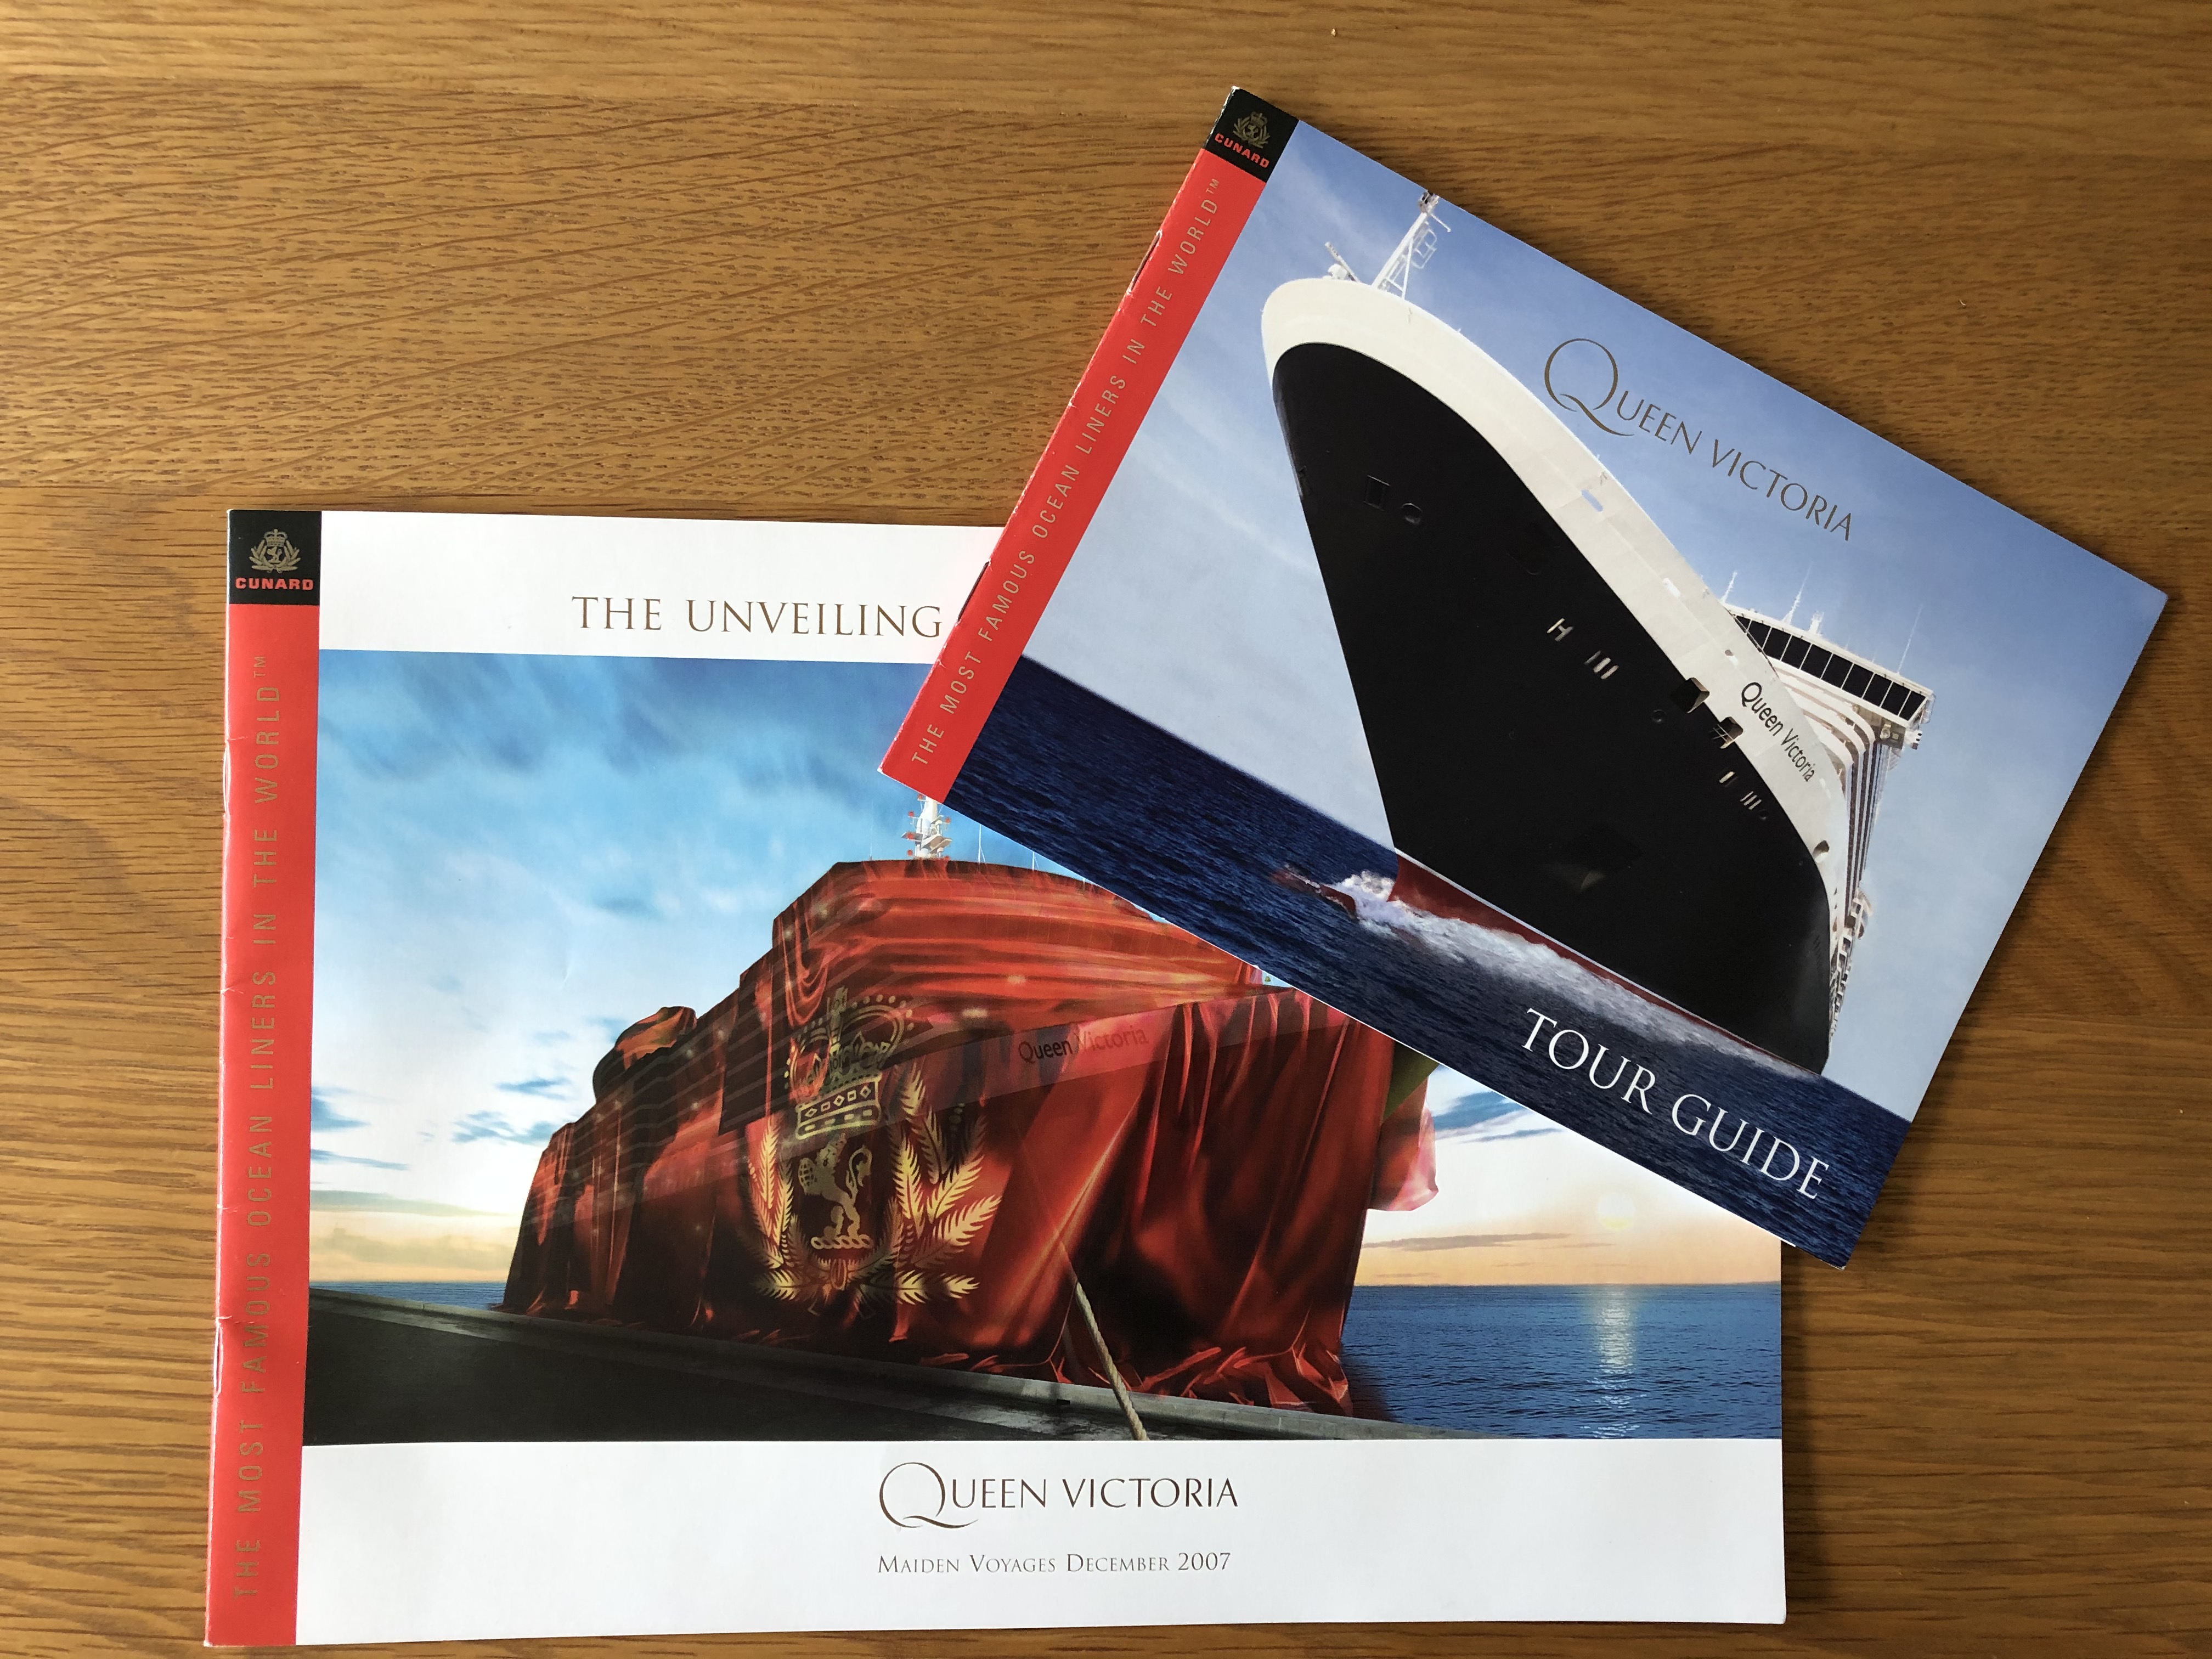 MAIDEN VOYAGE BOOKLETS OF THE CUNARD LINE VESSEL THE MS QUEEN VICTORIA